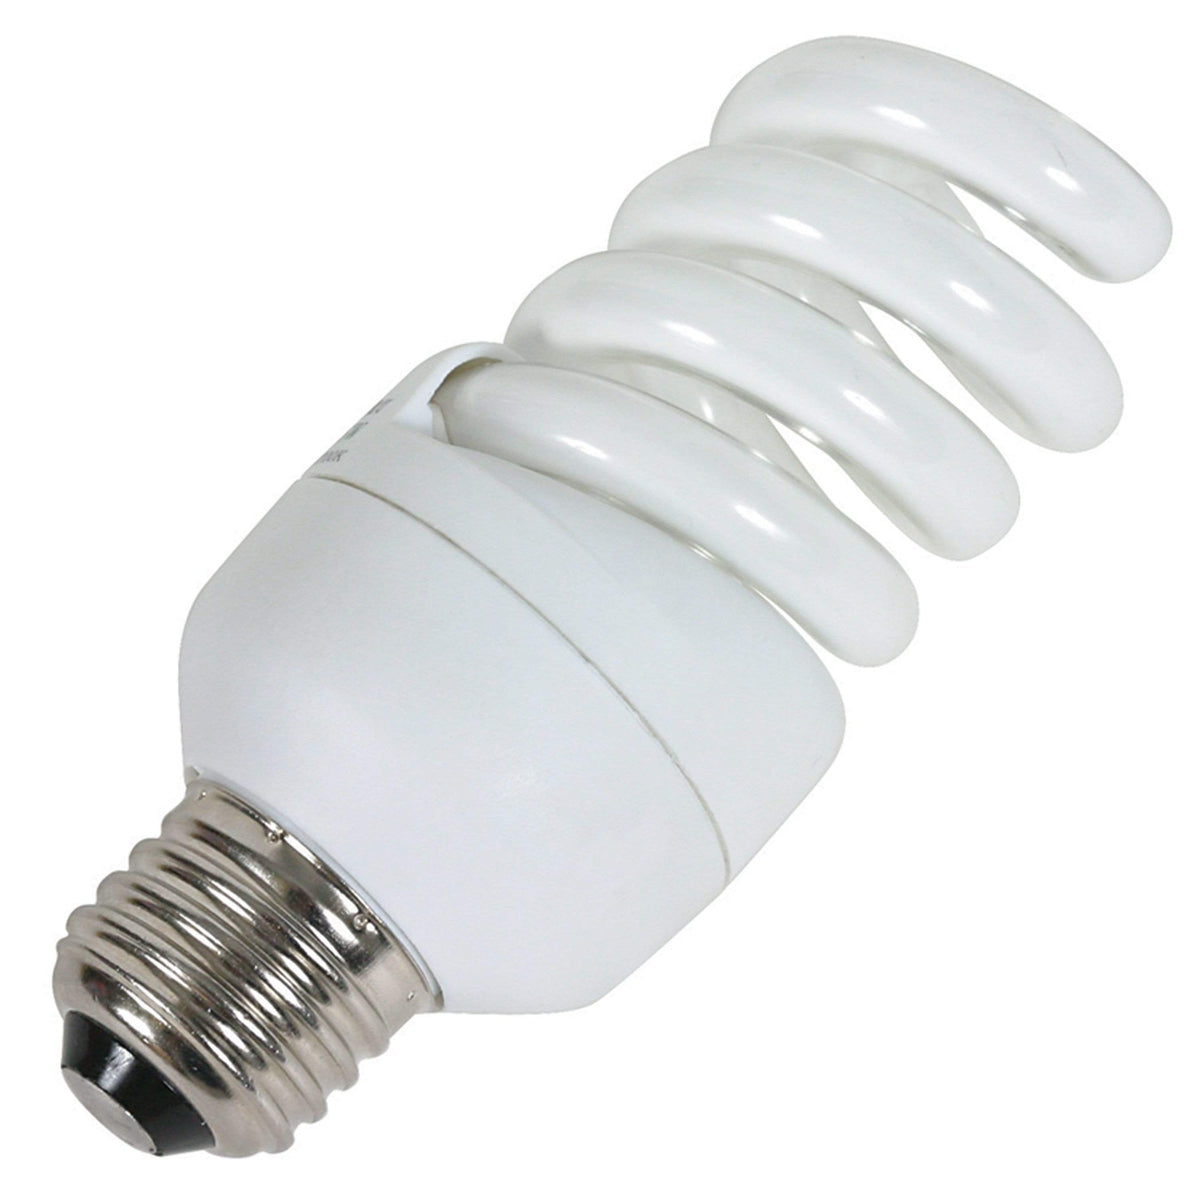 Camco Qualifies for Free Shipping Camco 12v 15w Fluorescent Bulb #41313